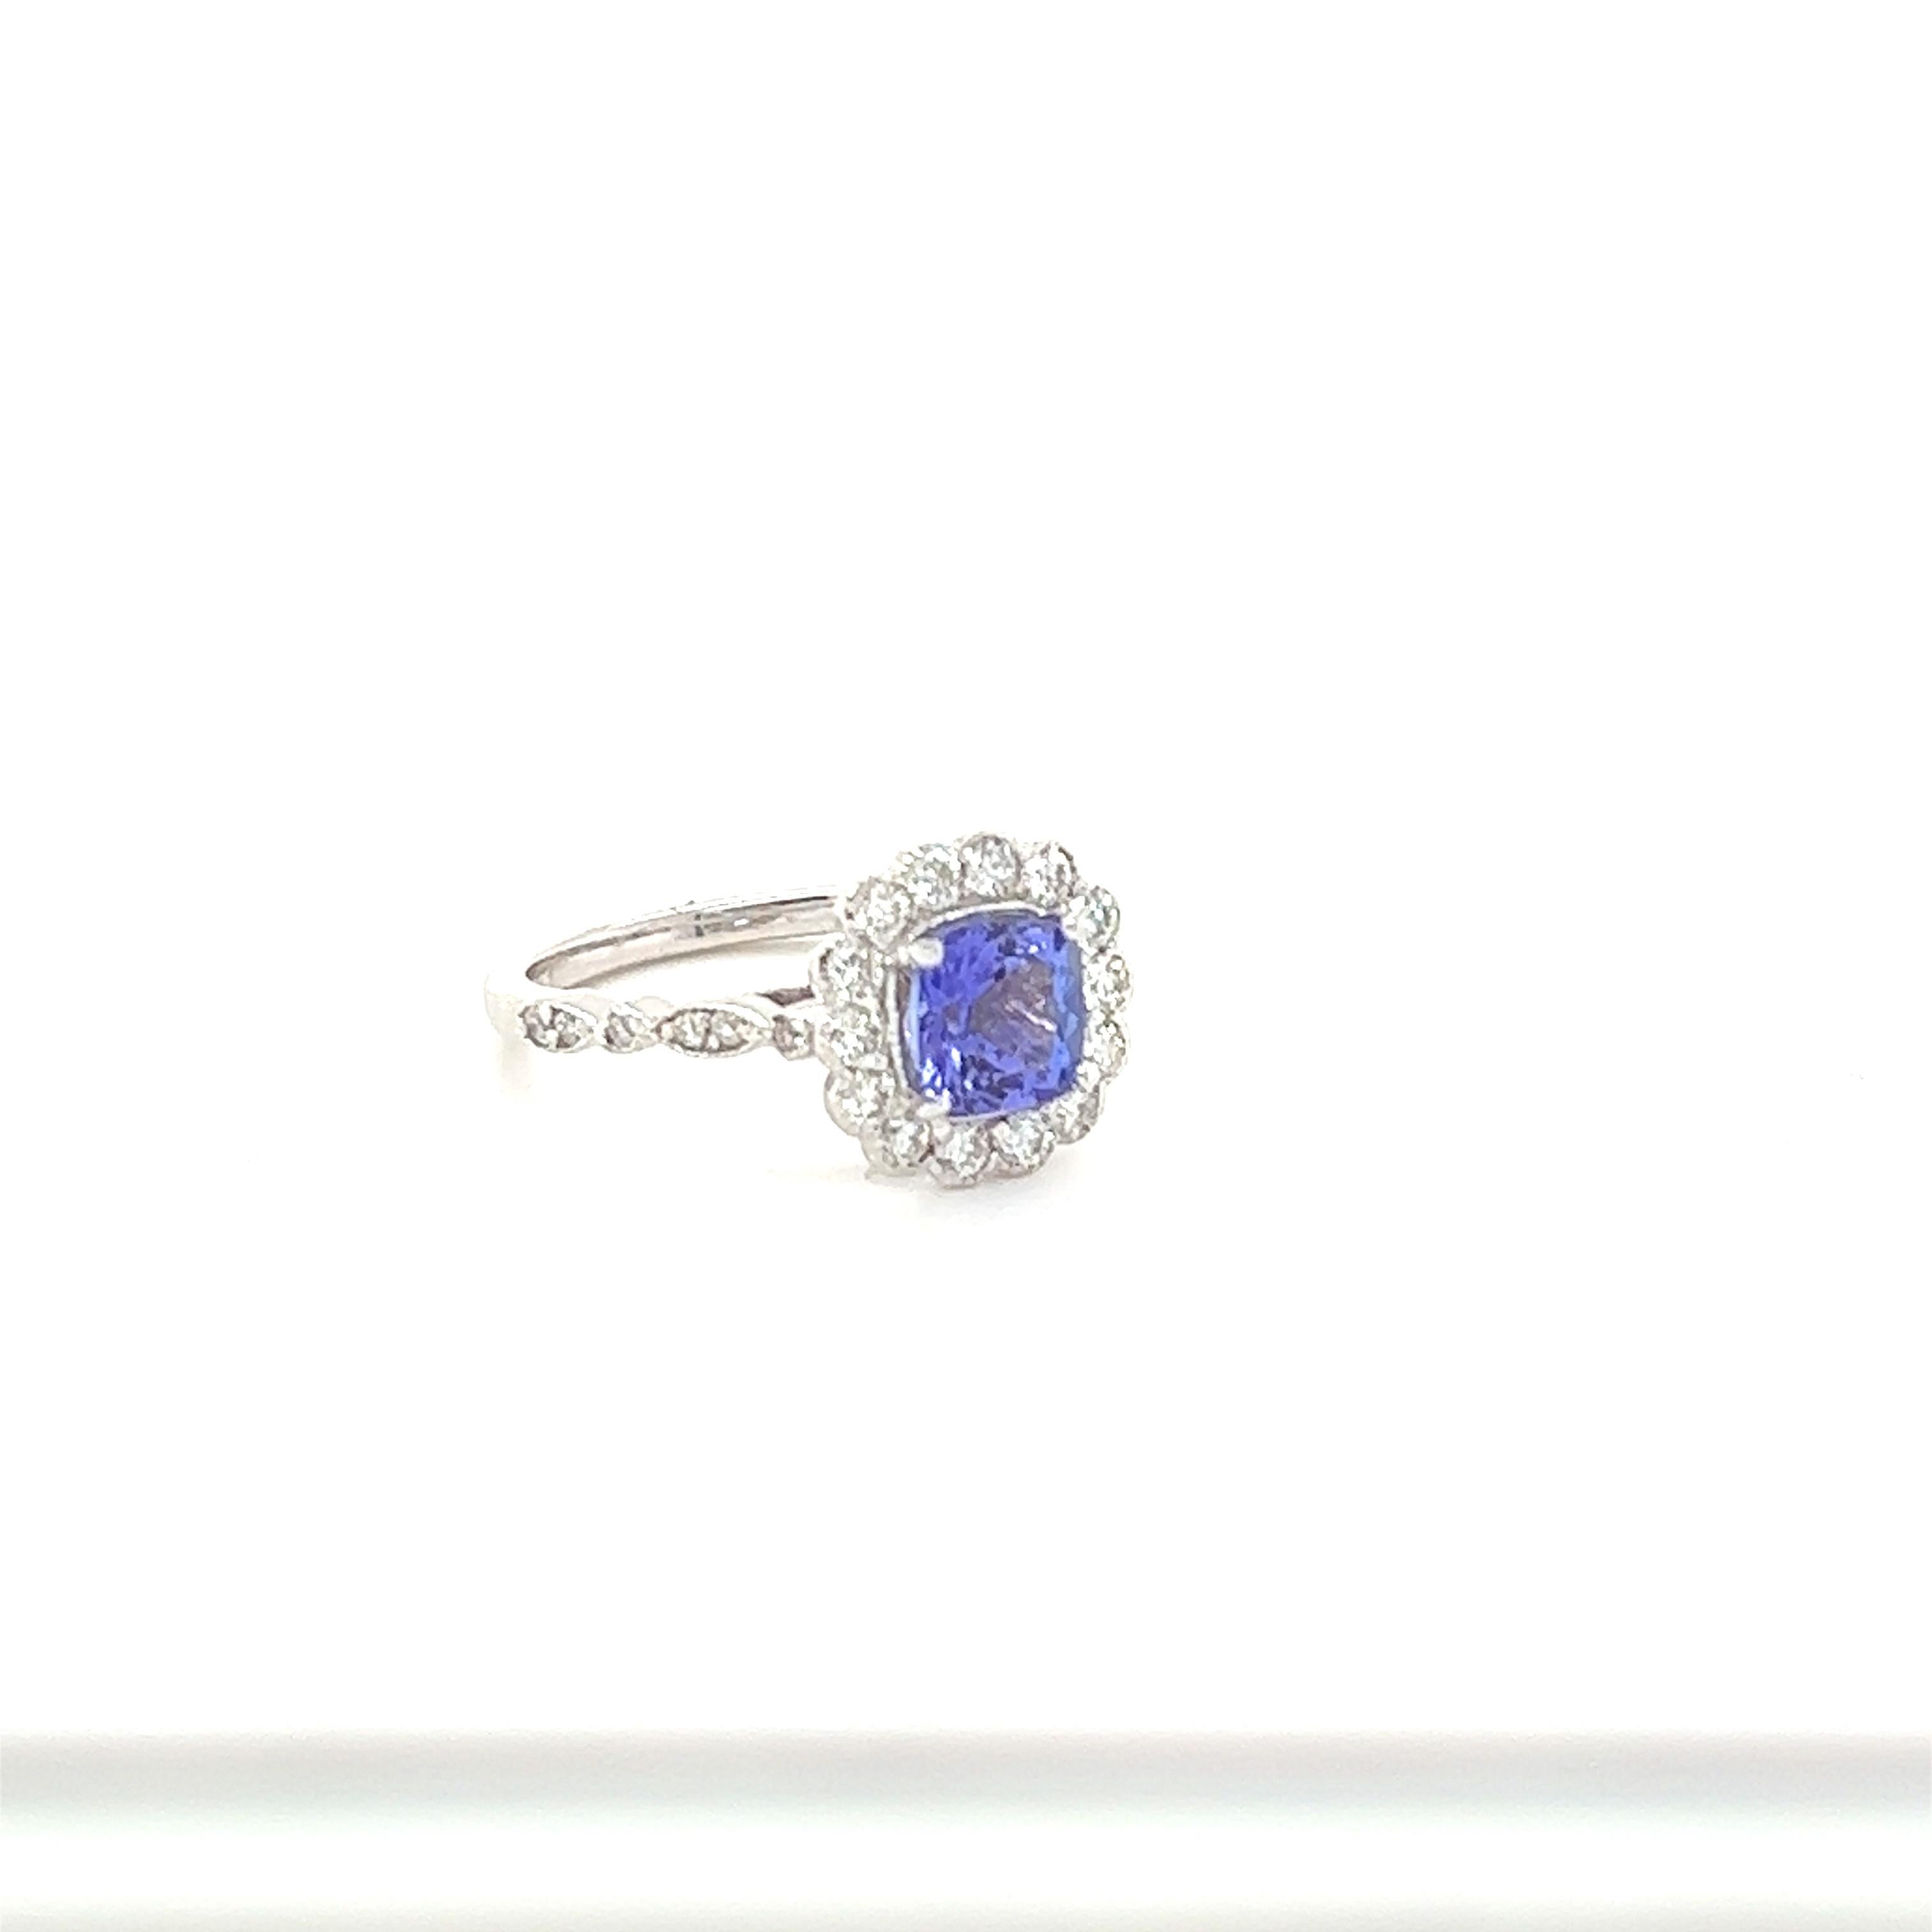 This beautiful ring has a vivid 1.26 Carat Natural Cushion Cut Tanzanite. The Tanzanite is surrounded by 26 Round Cut Diamonds that weigh 0.44 Carats. (Clarity: SI2, Color: F)  The total carat weight of the ring is 1.70 Carats.  

The ring is made